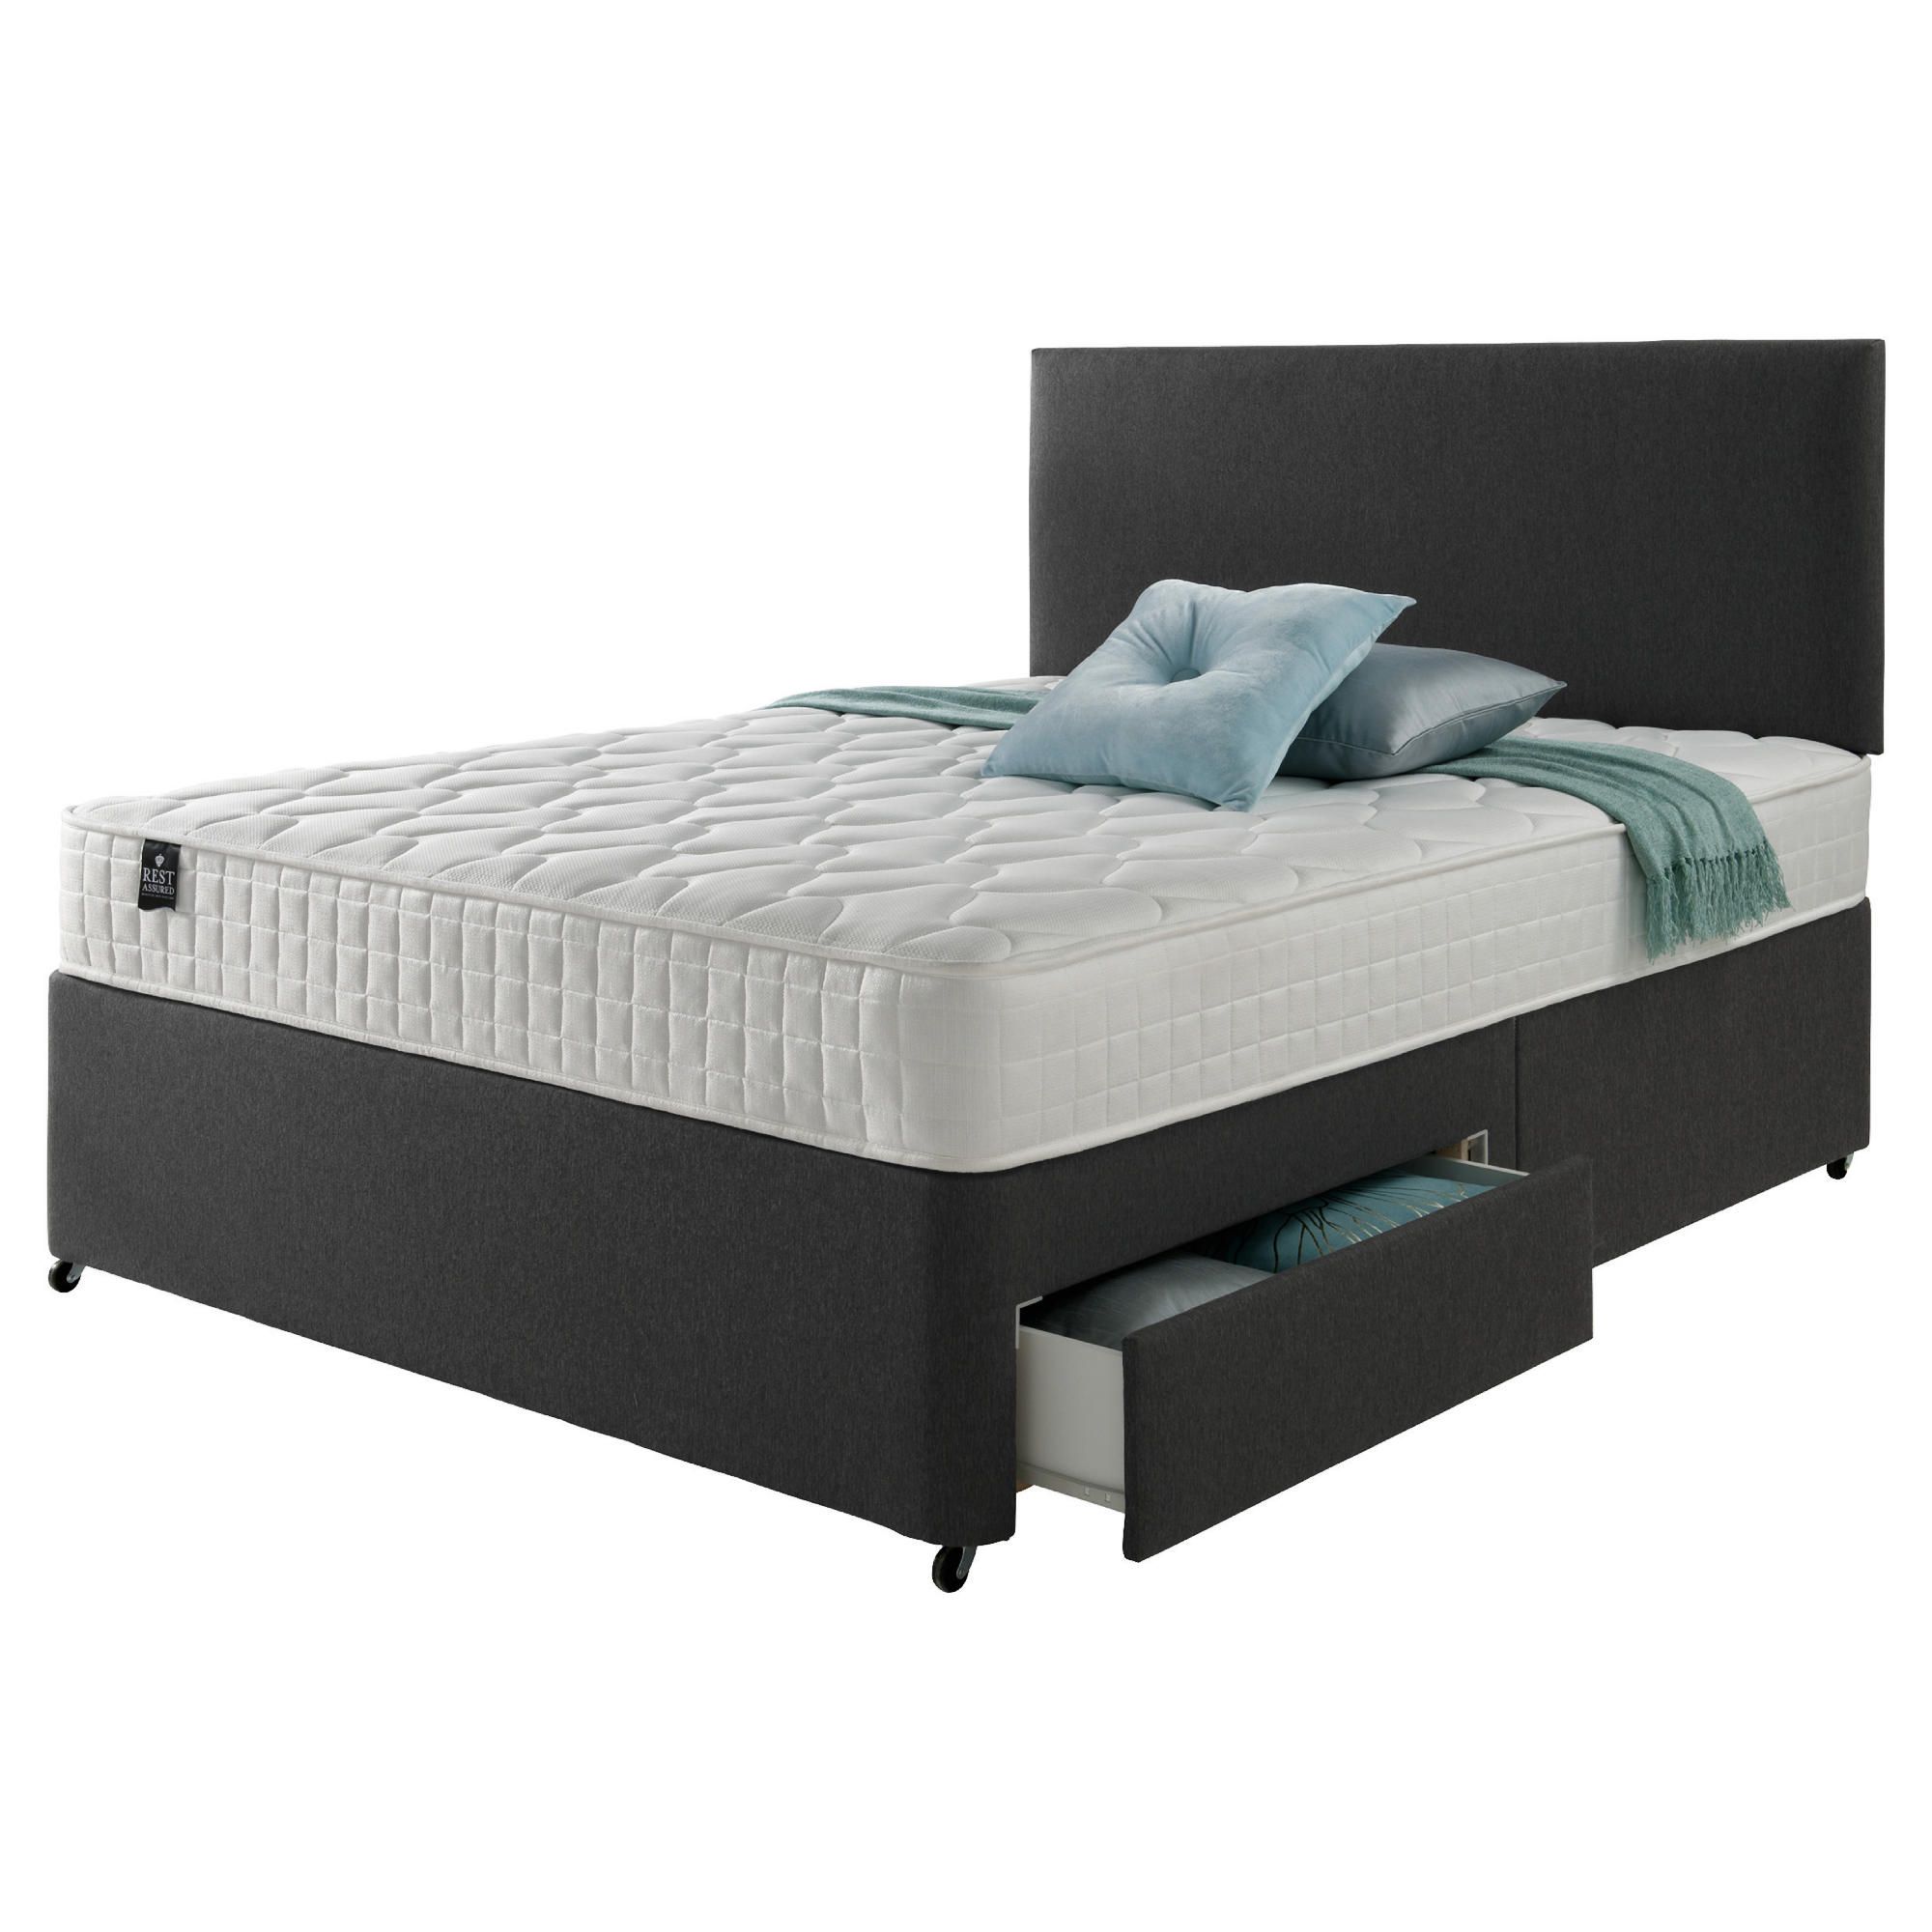 Rest Assured Classic 2 Drawer Super King Divan and Headboard Charcoal at Tesco Direct